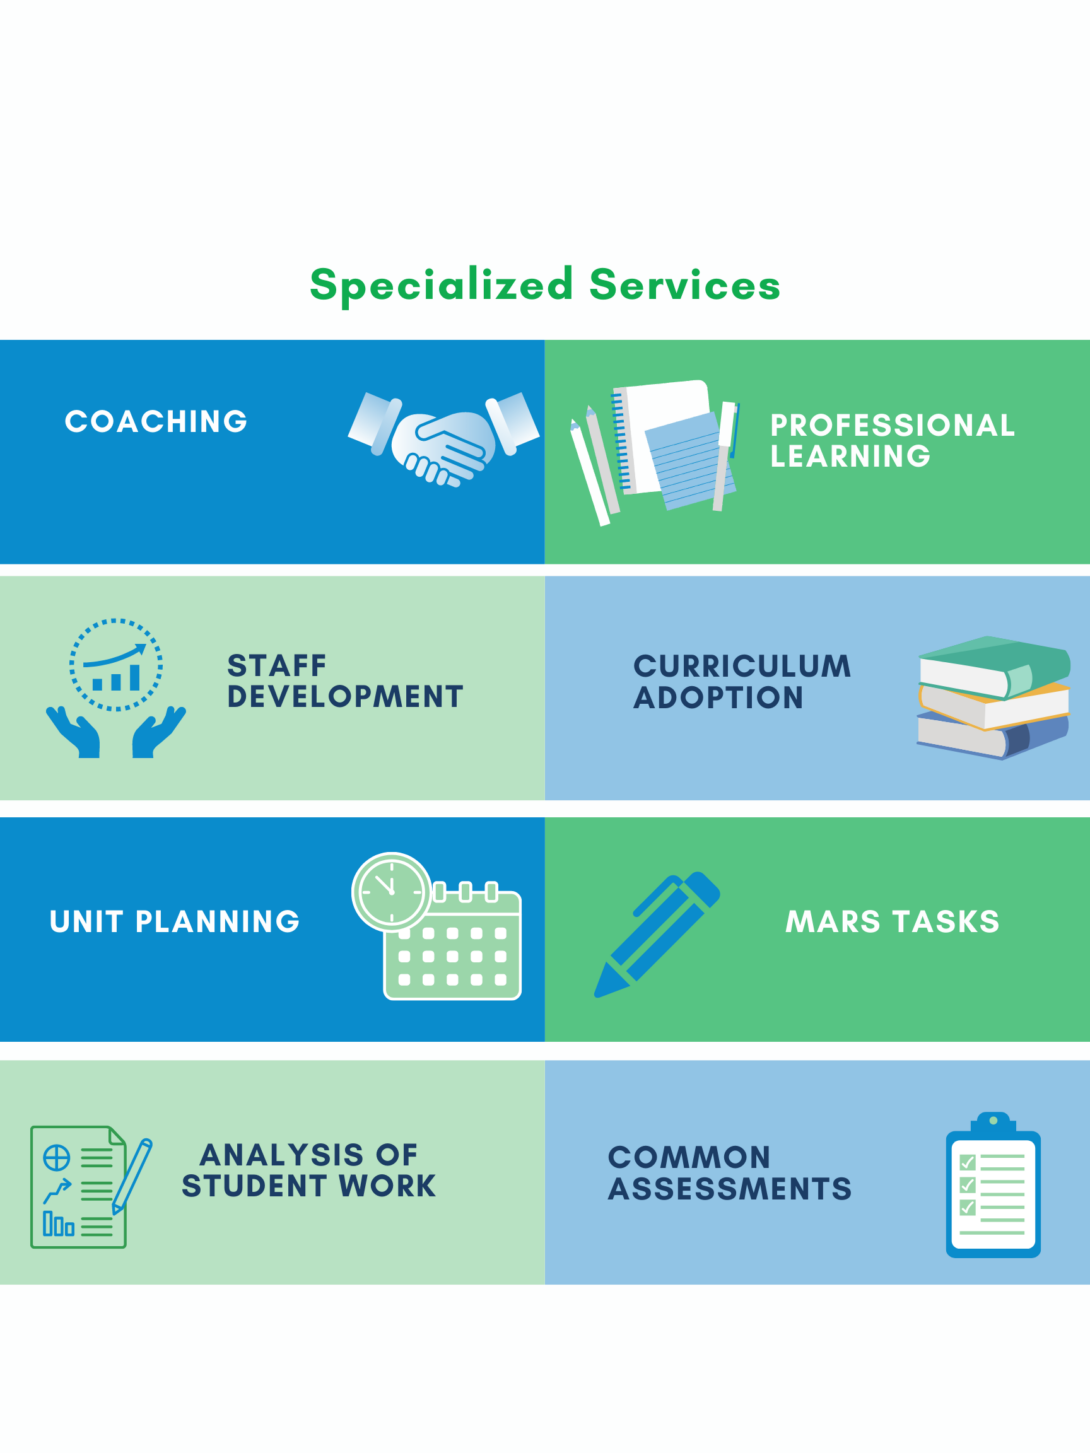 Specialized Services: Coaching, Staff Development, Unit Planning, Analysis of Student Work, Professional Learning, Curriculum Adoption, MARS Tasks, Common Assessments